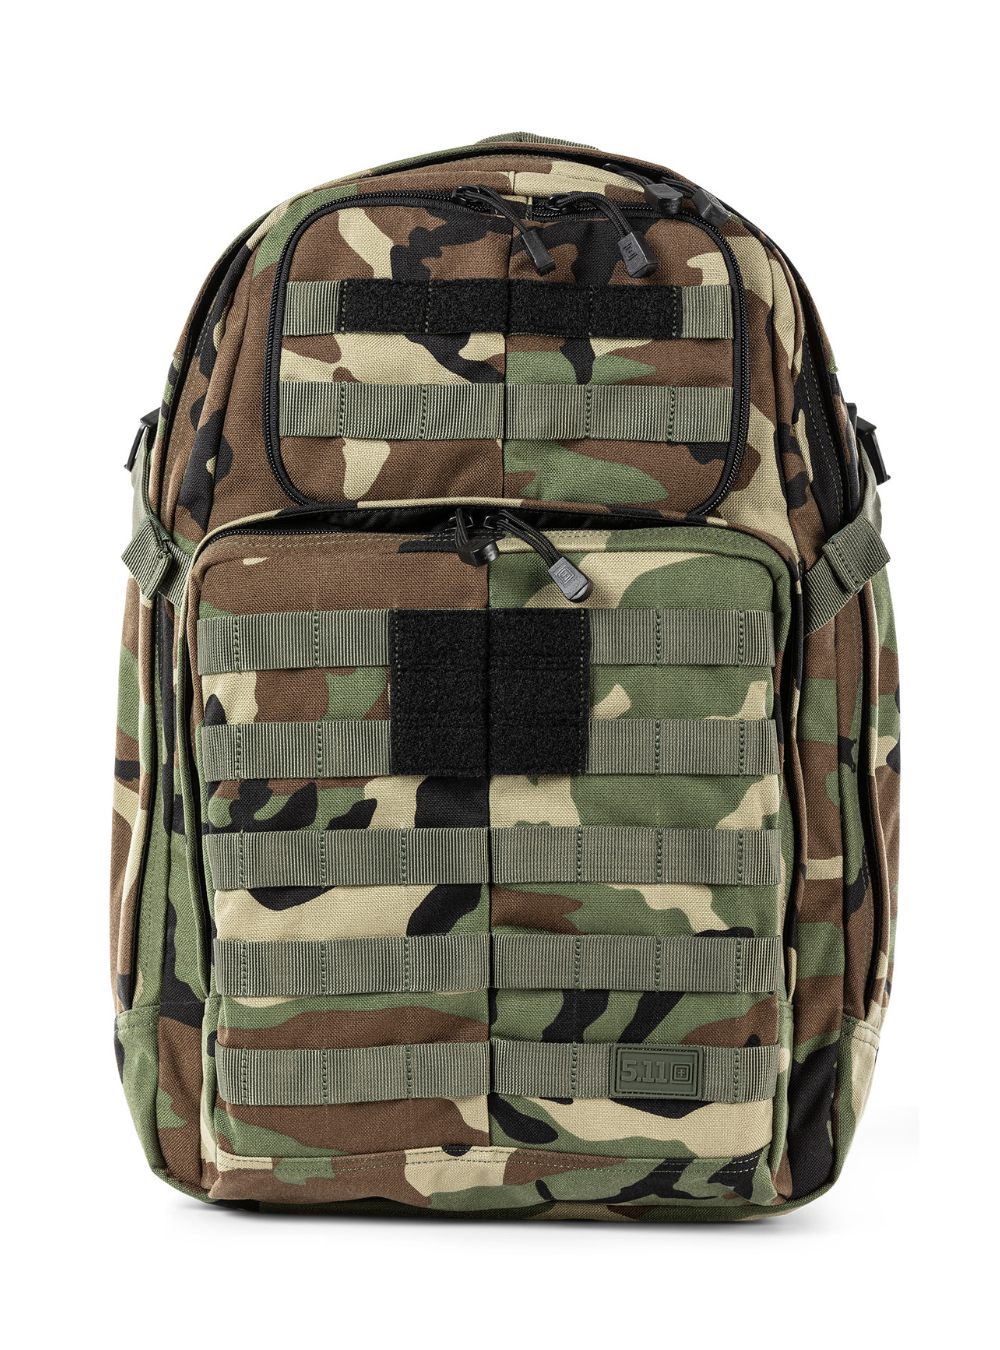 5.11 Tactical RUSH 24 2.0 Backpack - Woodland